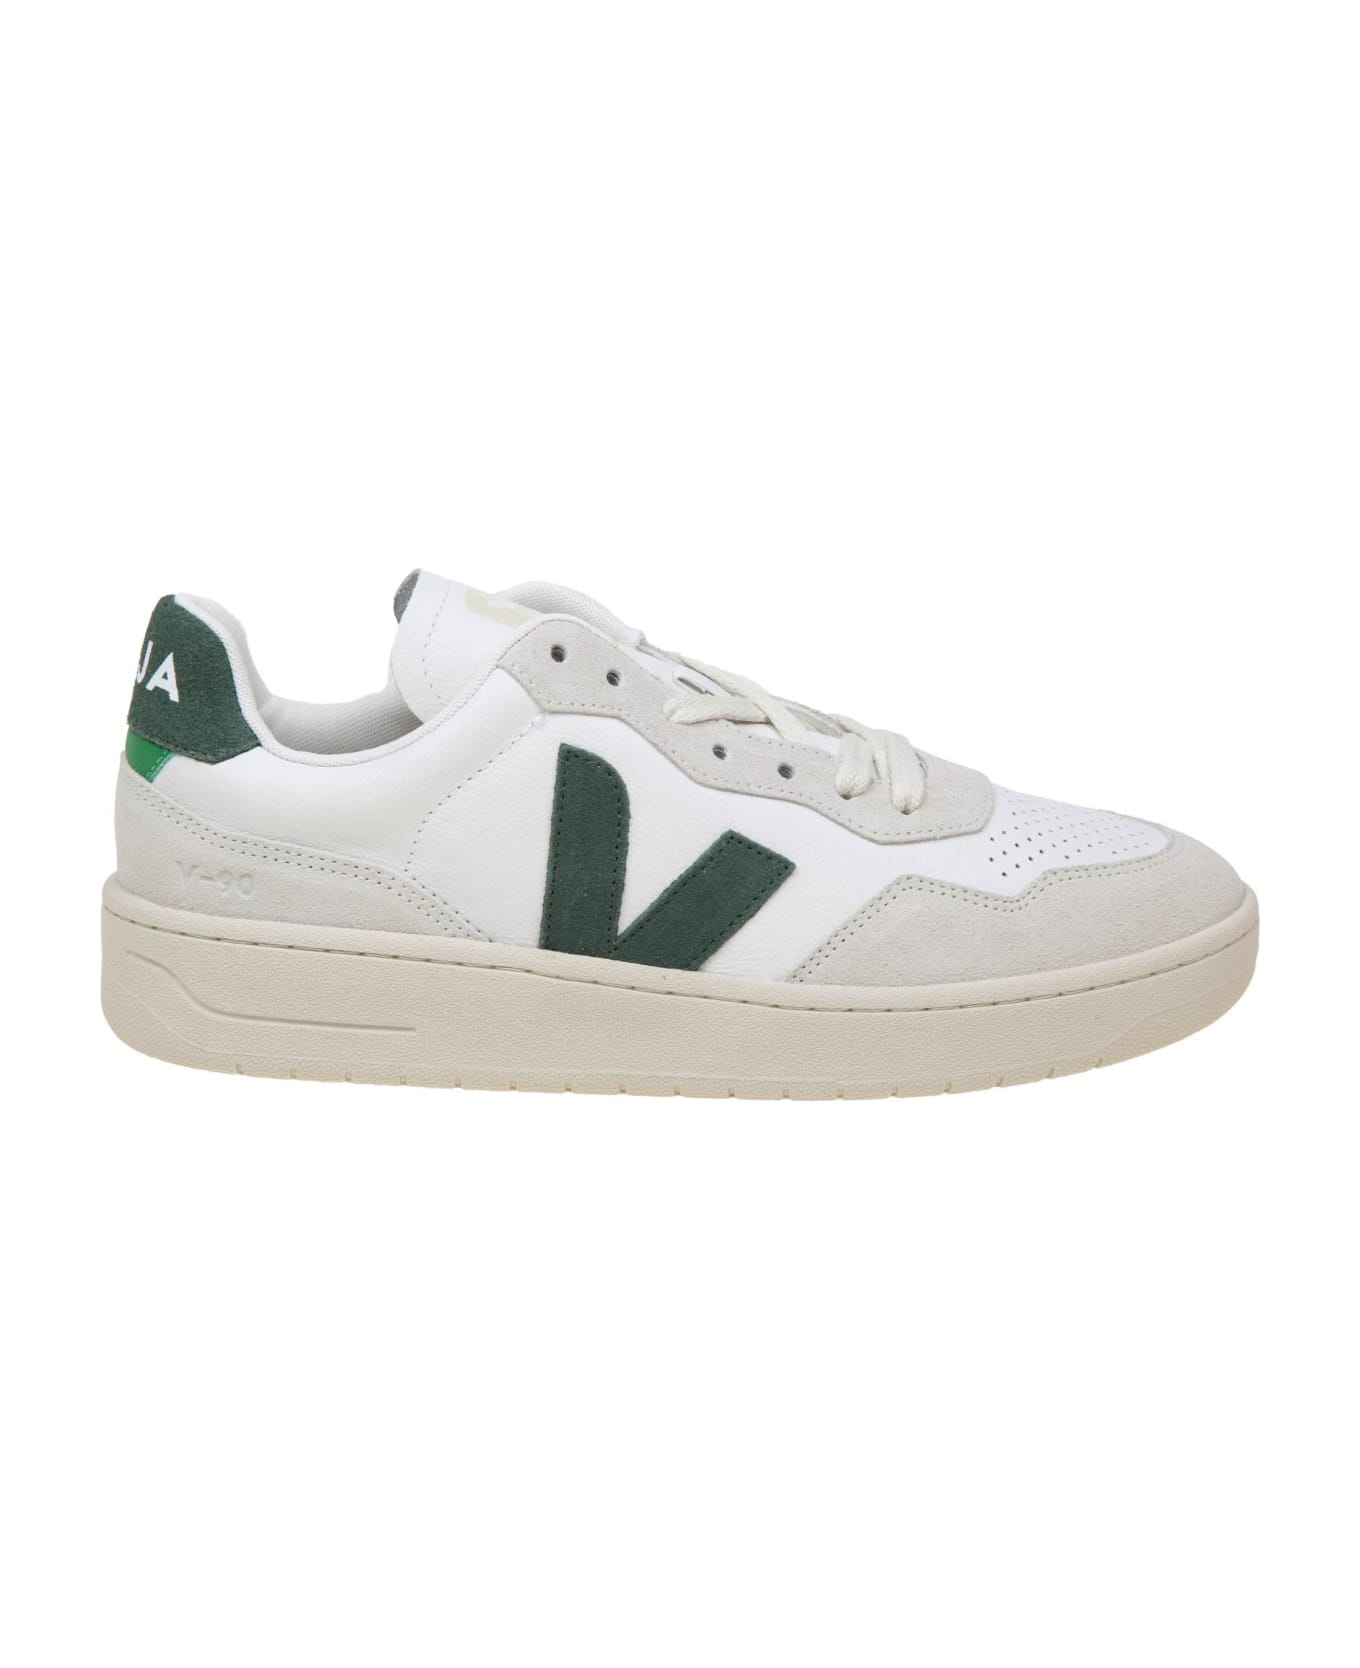 Veja V 90 Sneakers In White And Green Leather And Suede - WHITE/CYPRUS